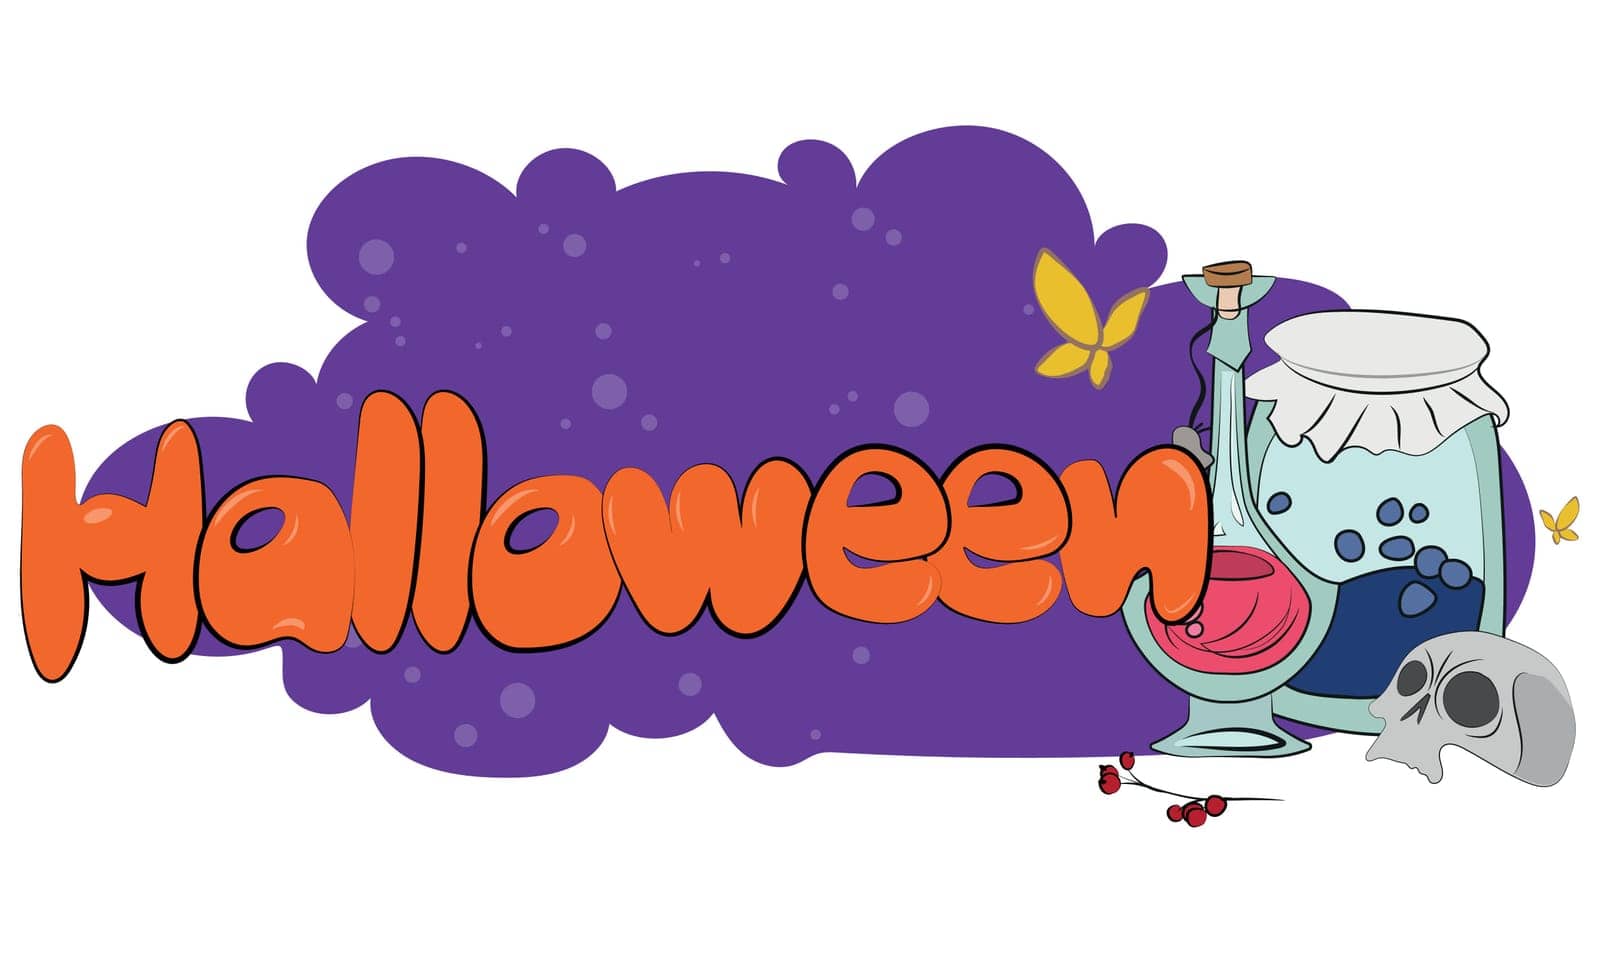 Happy Halloween banner or party invitation background with night clouds and pumpkins. Vector illustration. Full moon in the sky, spiders web and flying bats. Place for text